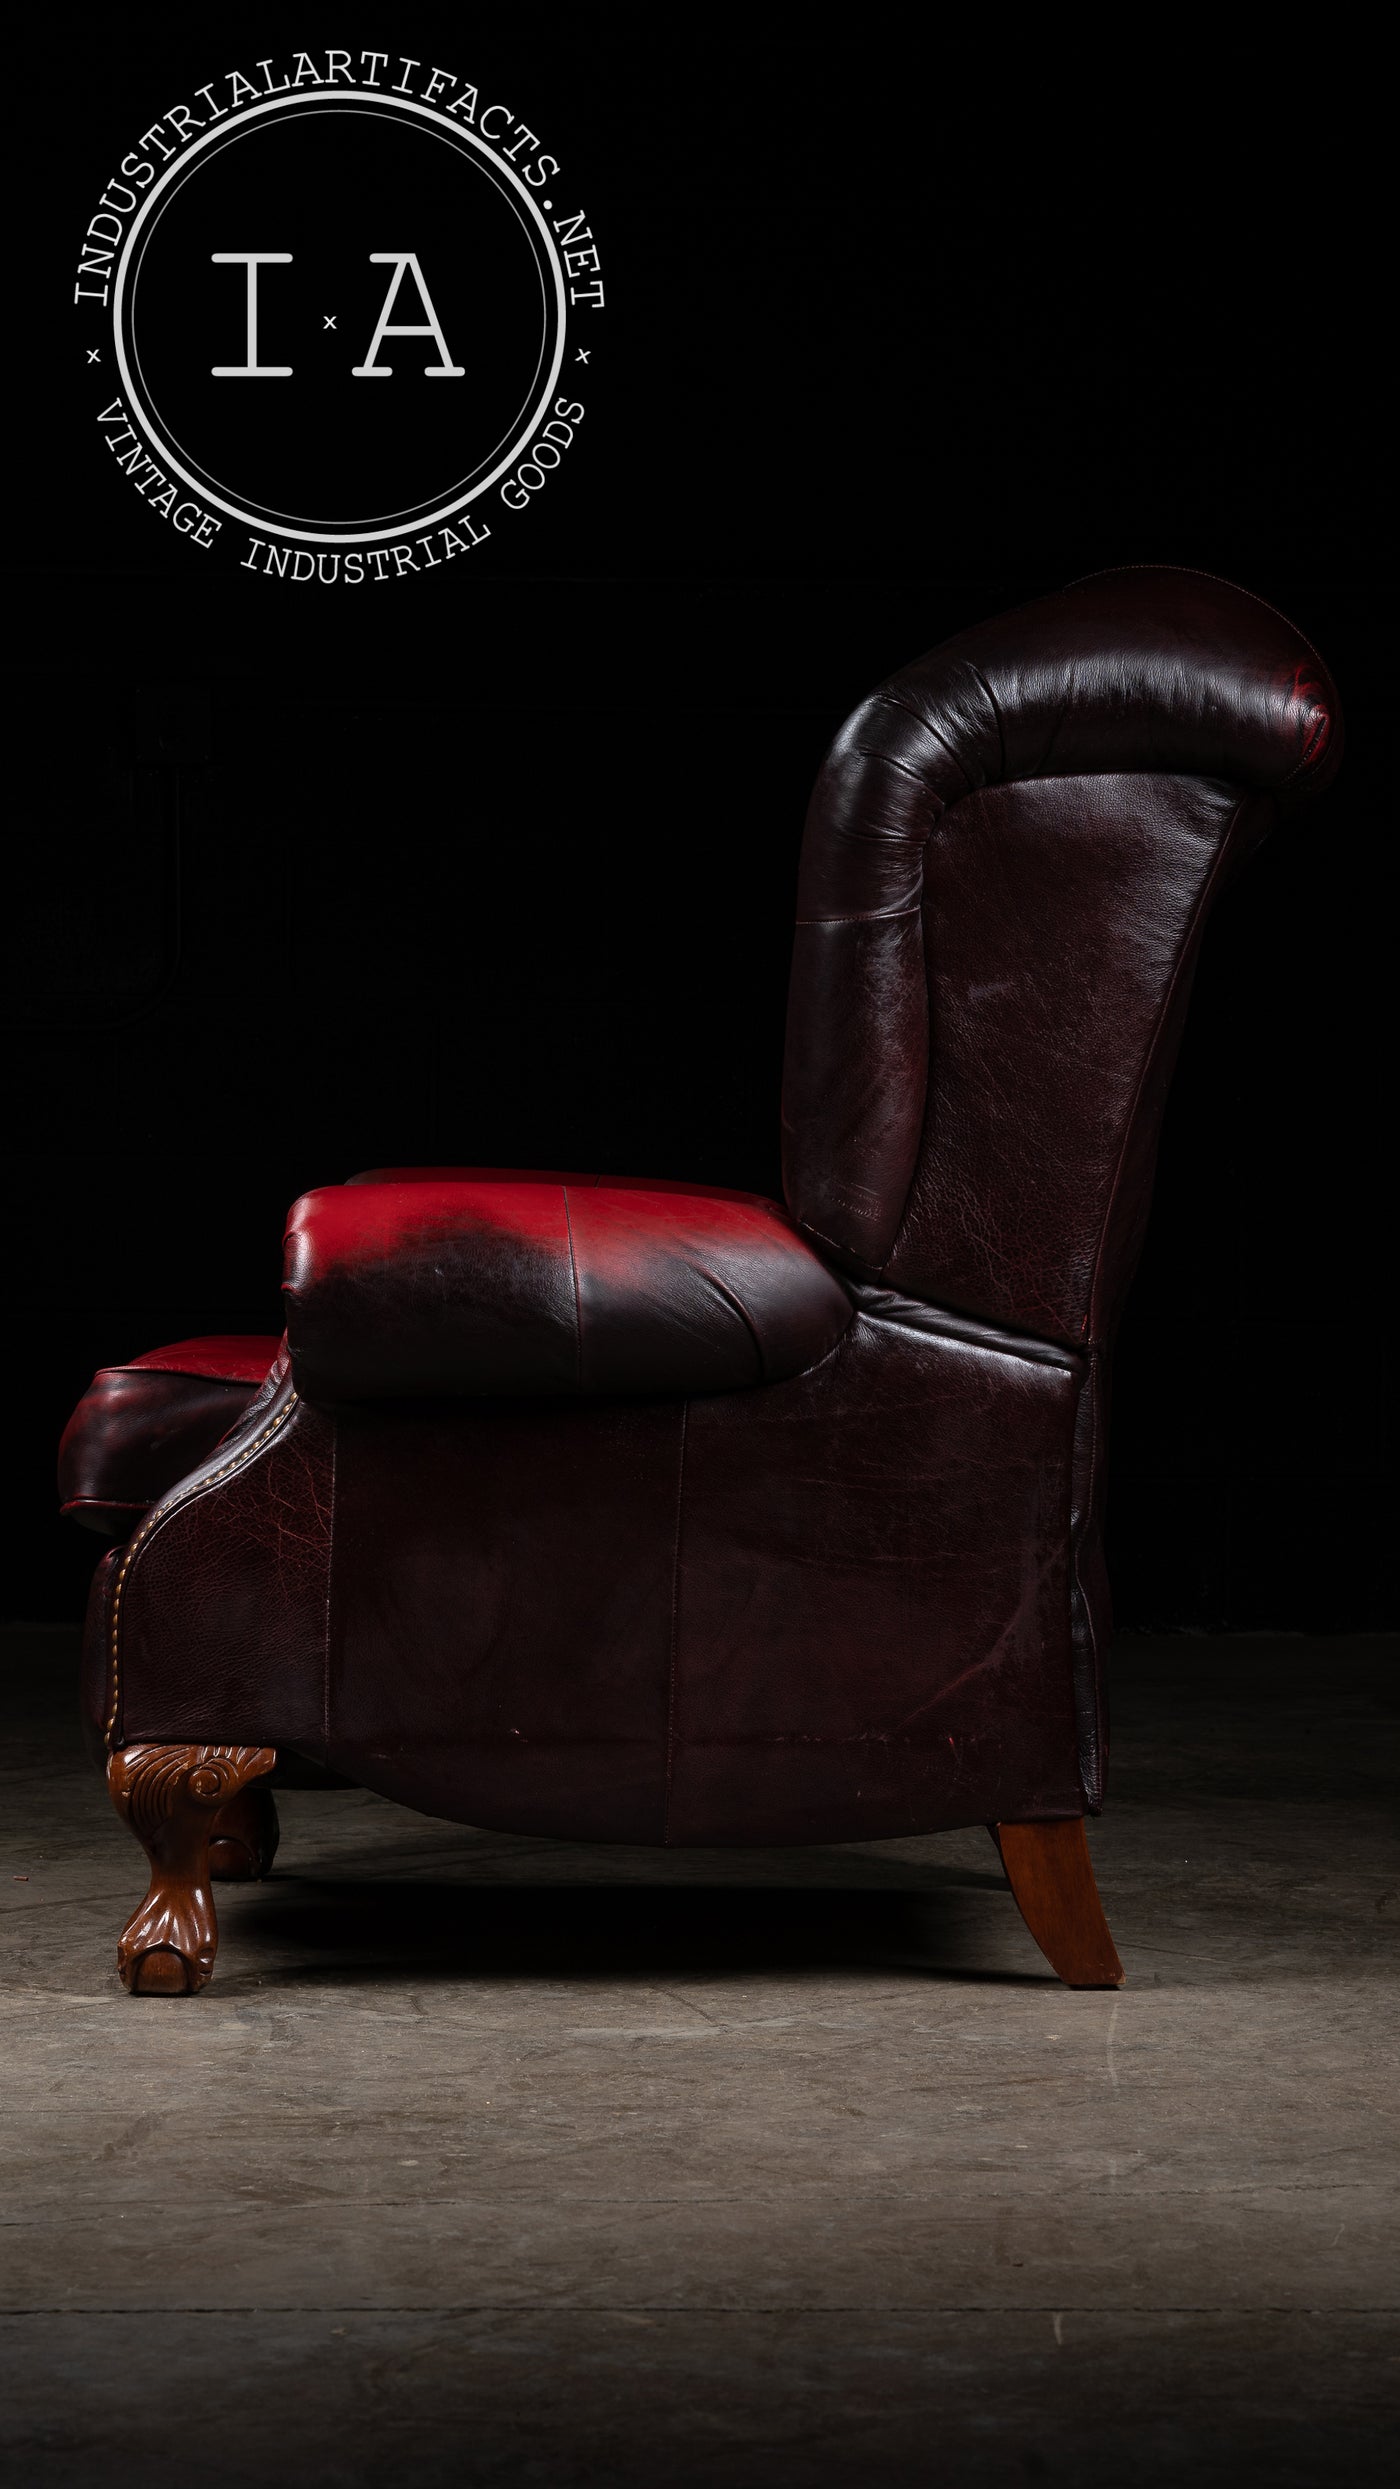 Vintage Tufted Wingback Recliner Chair In Oxblood